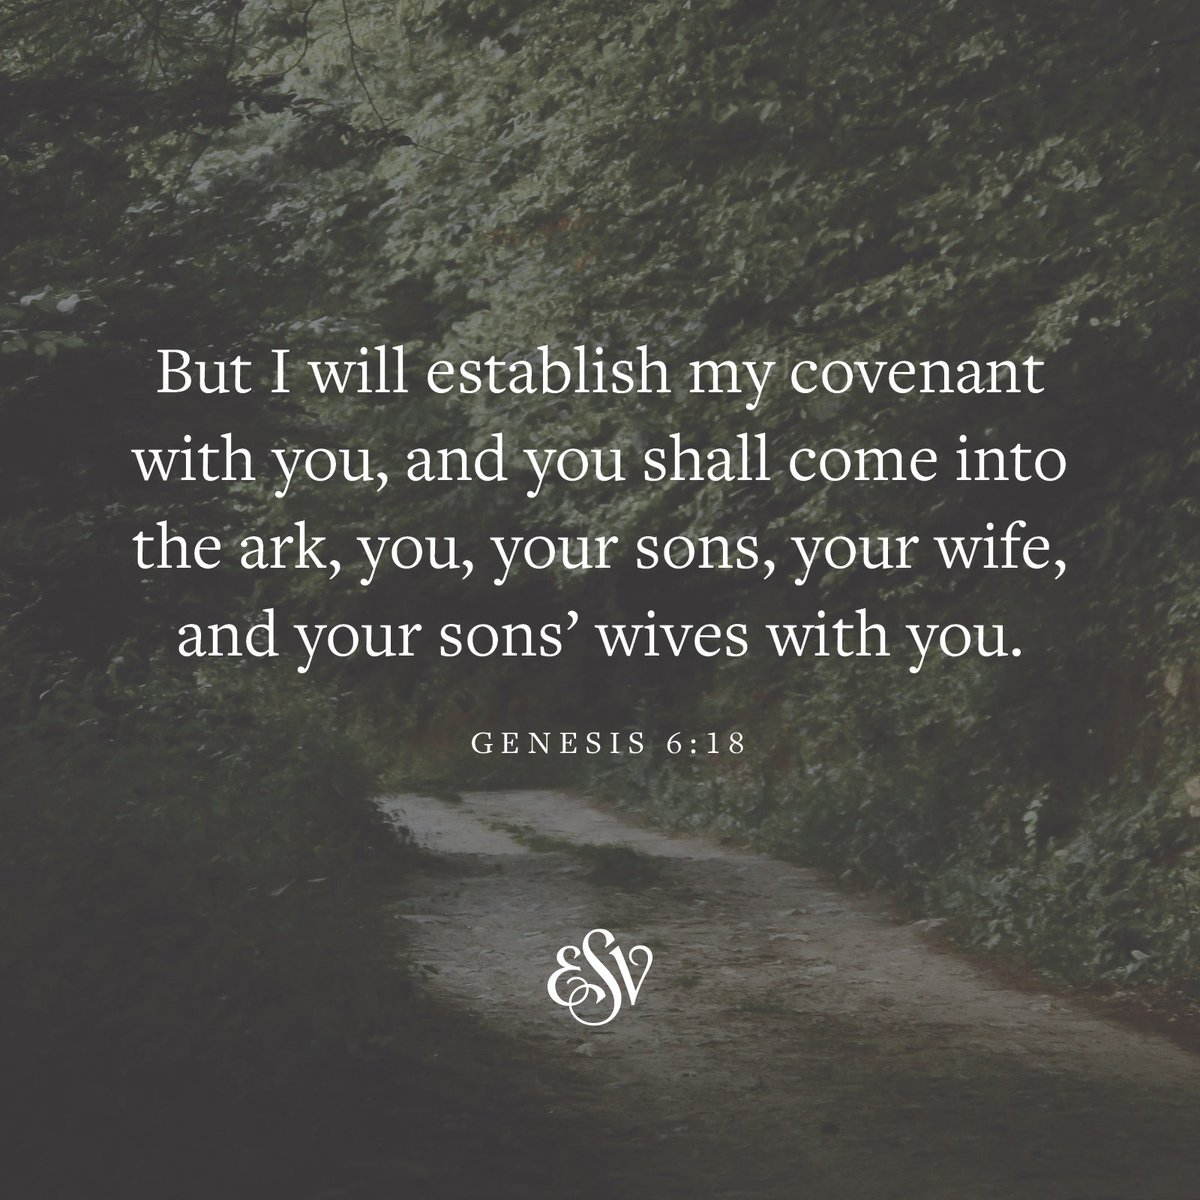 But I will establish my covenant with you, and you shall come into the ark, you, your sons, your wife, and your sons' wives with you. 
—Genesis 6:18 ESV.org

#Verseoftheday #ESV #Scripturememoryverse #Bible